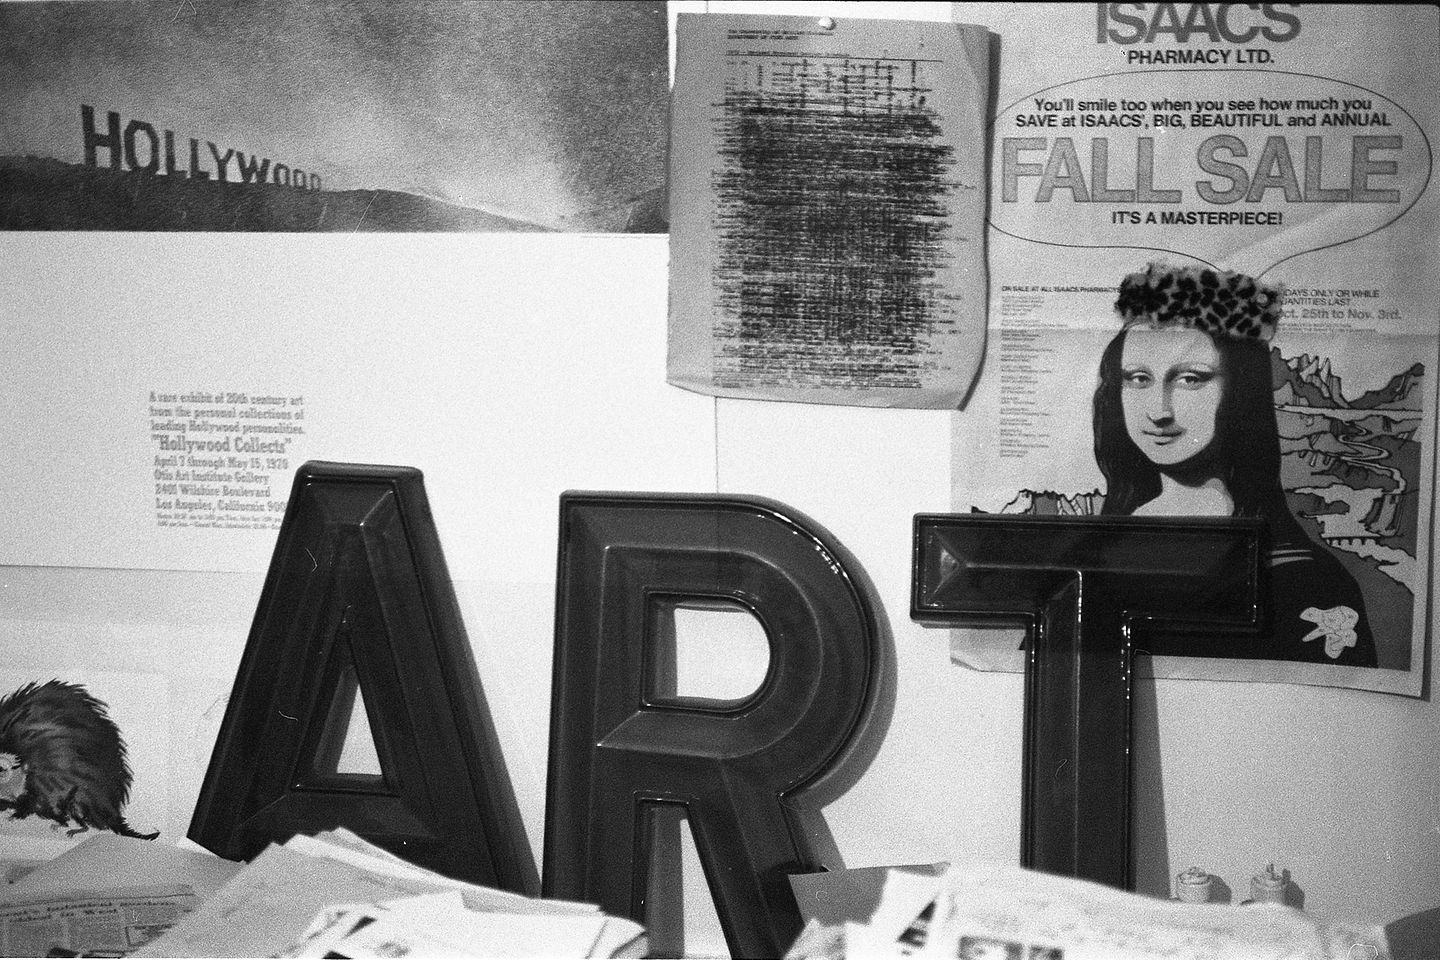 A black and white photograph of large sculptural black letters spelling out “A R T” leaning against a wall. The wall has posters and other pieces of paper tacked up on it, including an advertisement for Isaacs Pharmacy Ltd that features an image of Da Vinci’s Mona Lisa with text that reads: “You’ll smile too when you see how much you SAVE at ISAAC’S, BIG, BEAUTIFUL, and ANNUAL FALL SALE: IT’S A MASTERPIECE!”, and an exhibition poster for “Hollywood Collects” that shows a photograph of the Hollywood sign at sunset. More stacks of paper are visible in the foreground.